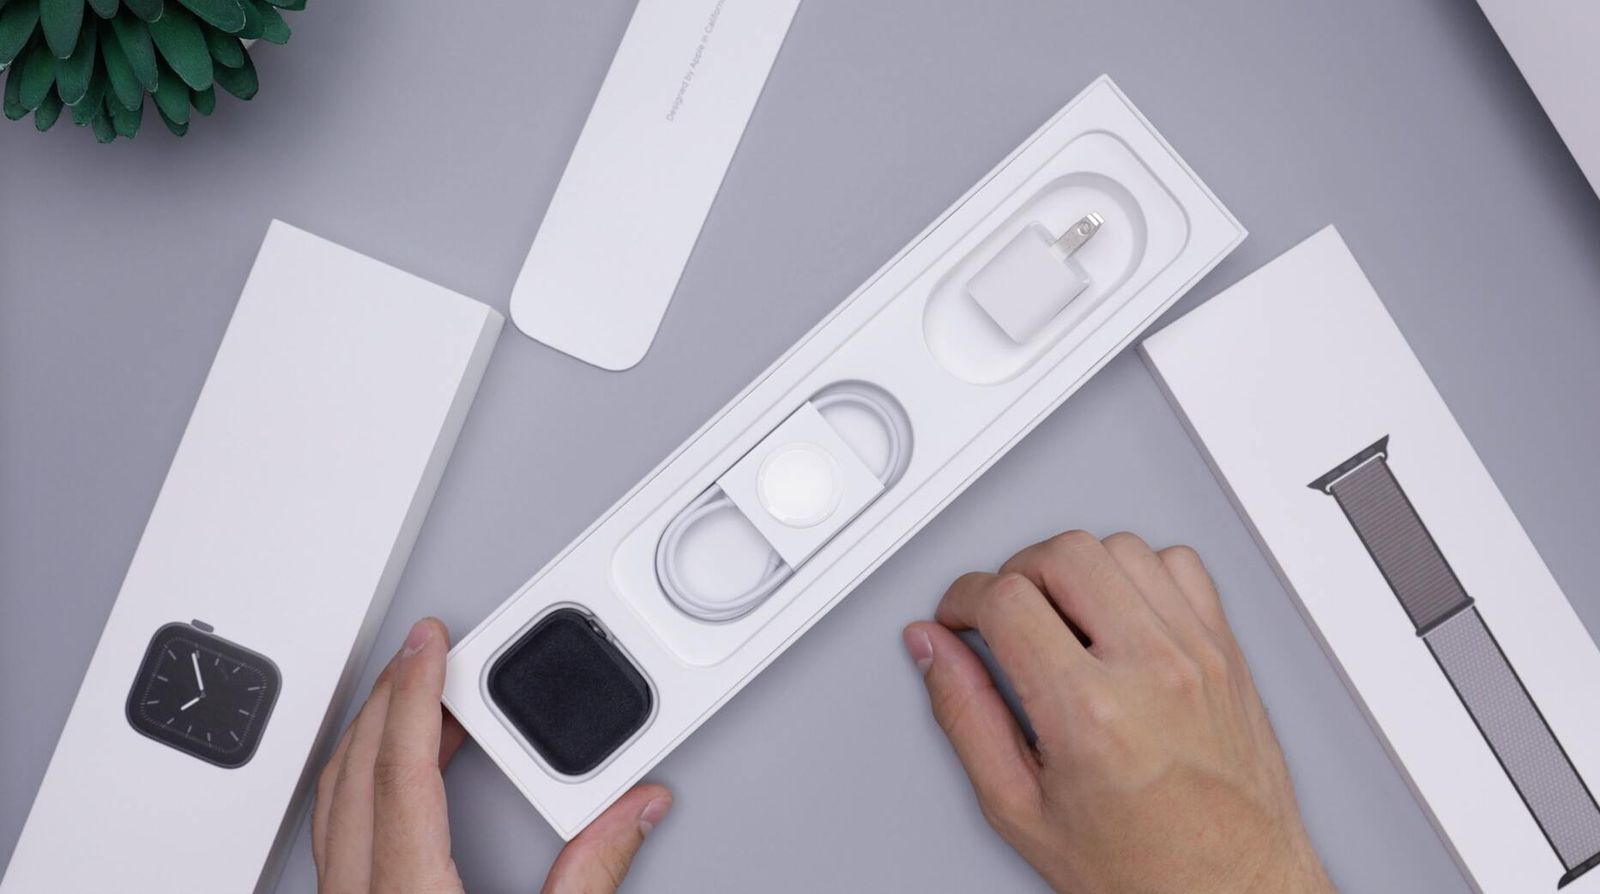 Apple Watch Packaging Pulp Inlay and Rigid box